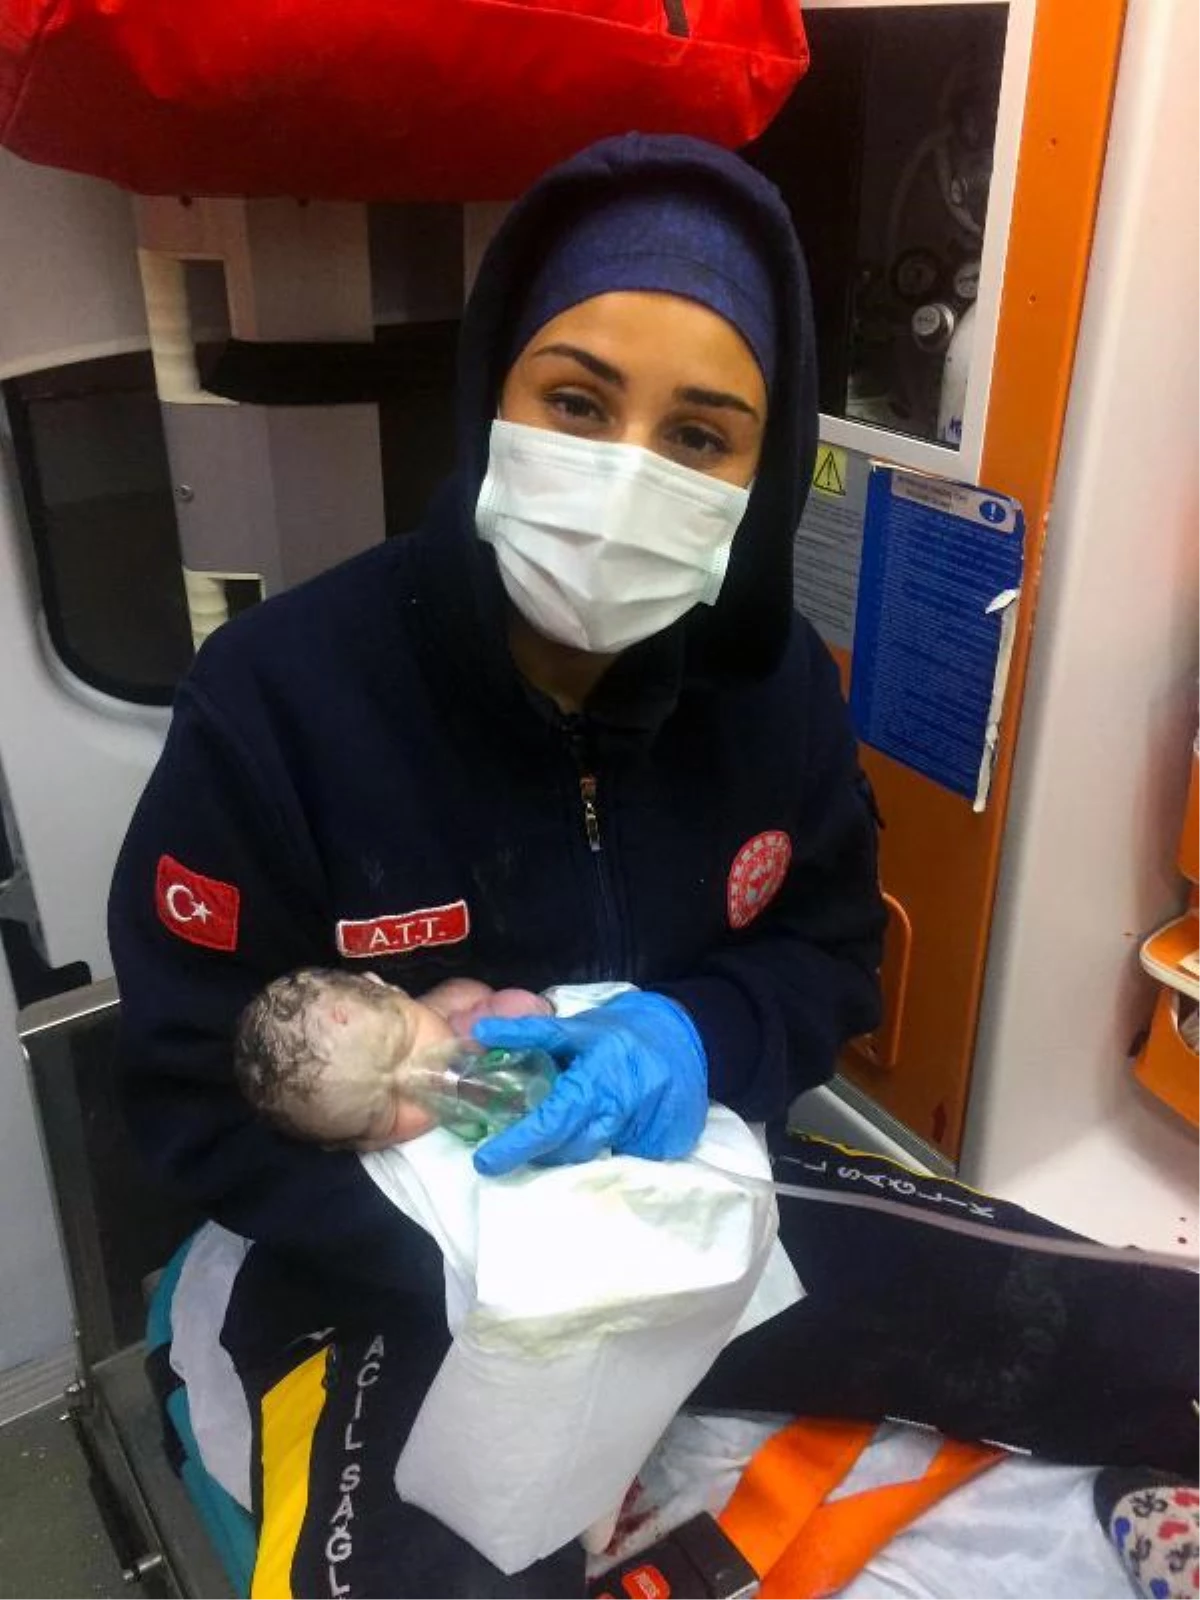 The baby whose heart stopped in ambulance brought back to life